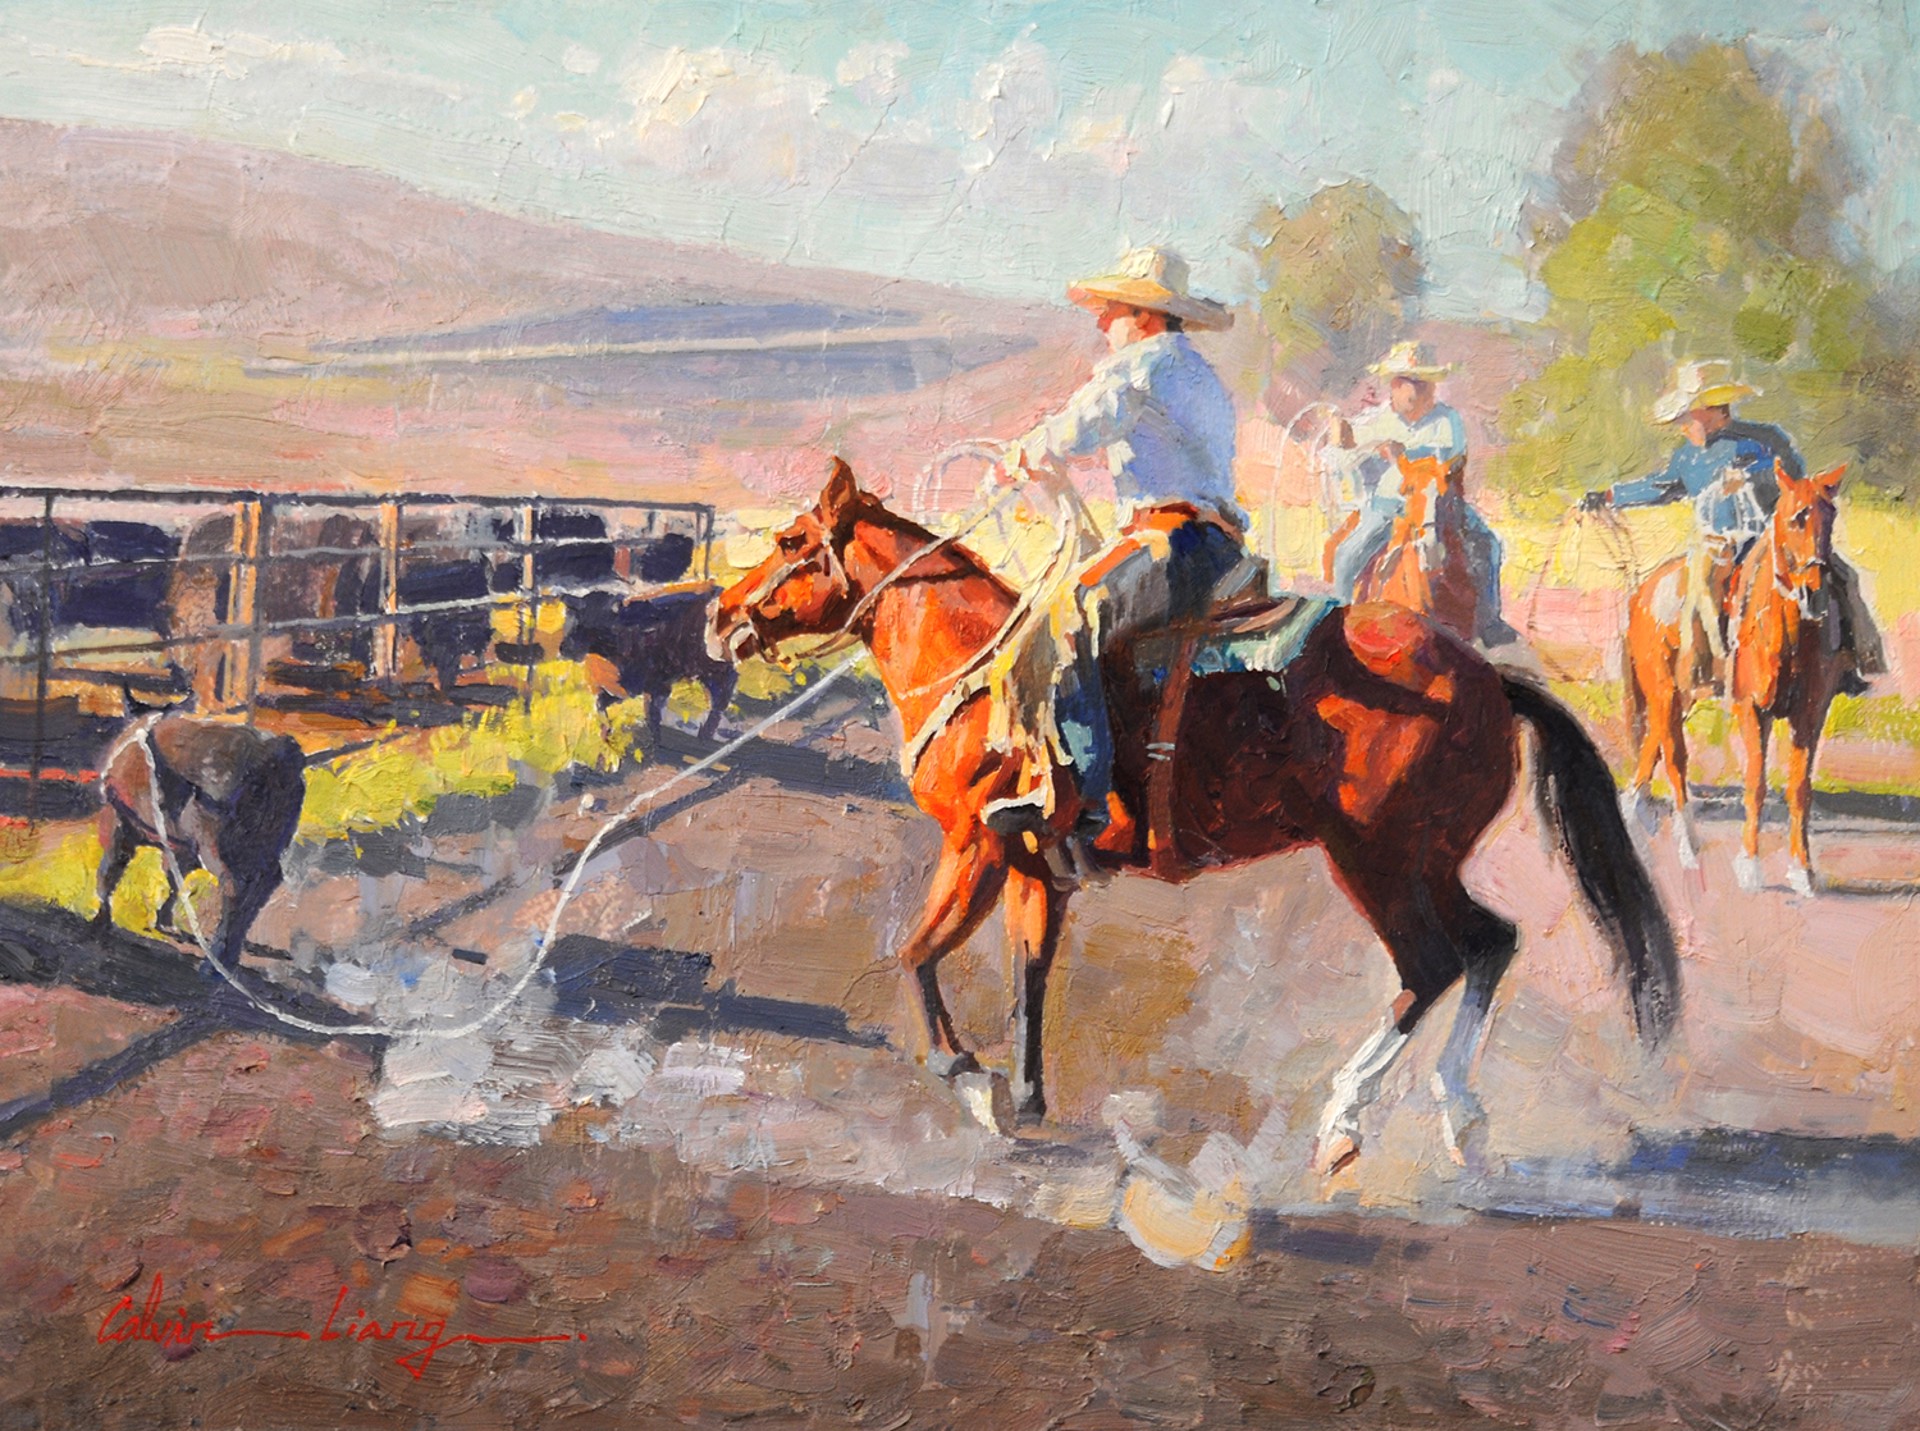 Calvin Liang, OPAM "Ranch Work" by Oil Painters of America